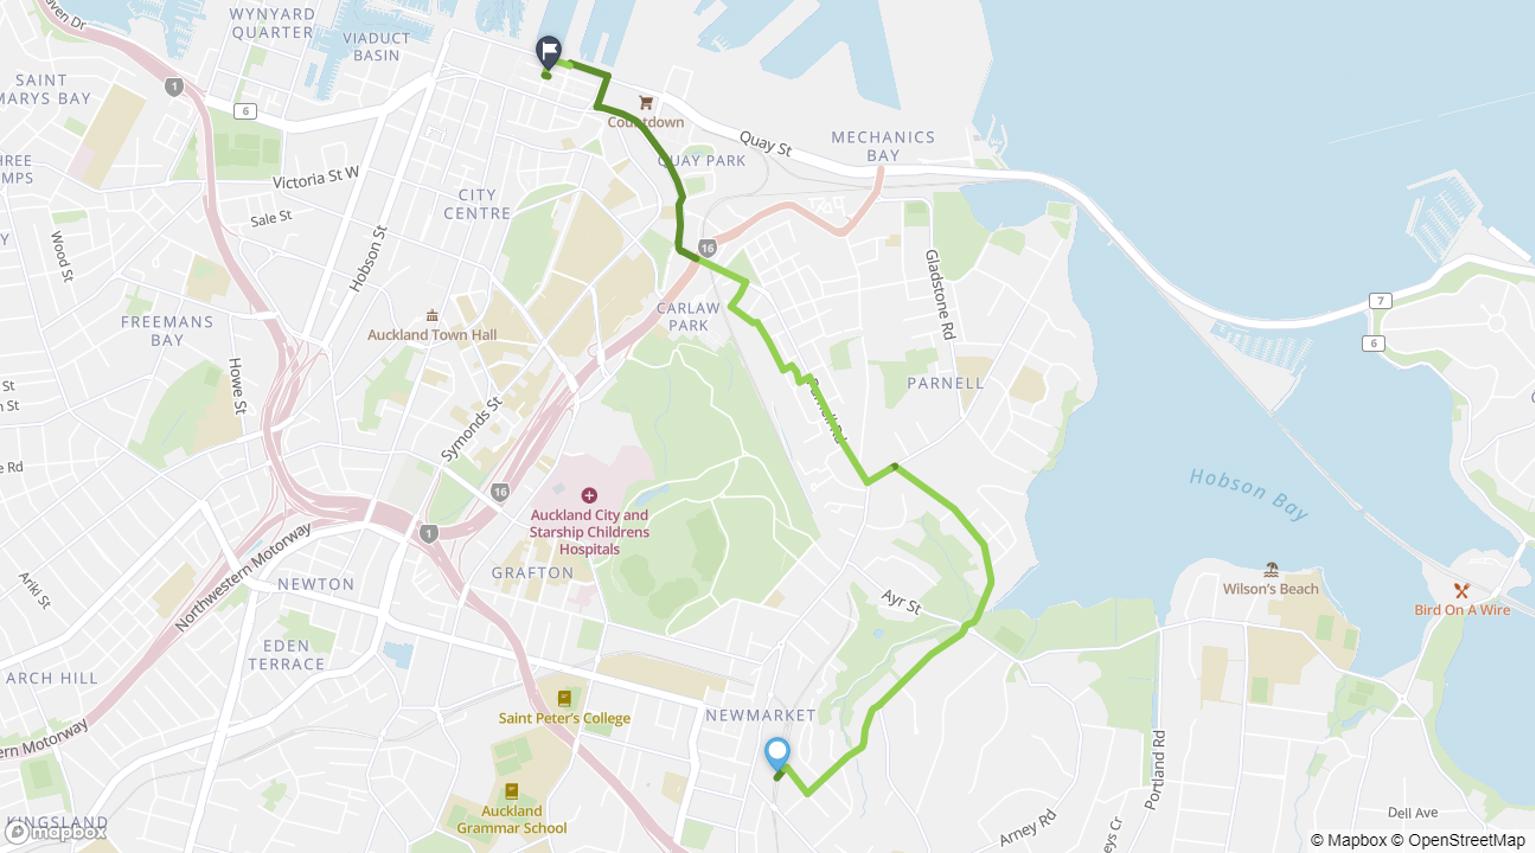 Map showing cycling route from Newmarket Station to Waitematā Station (Britomart)